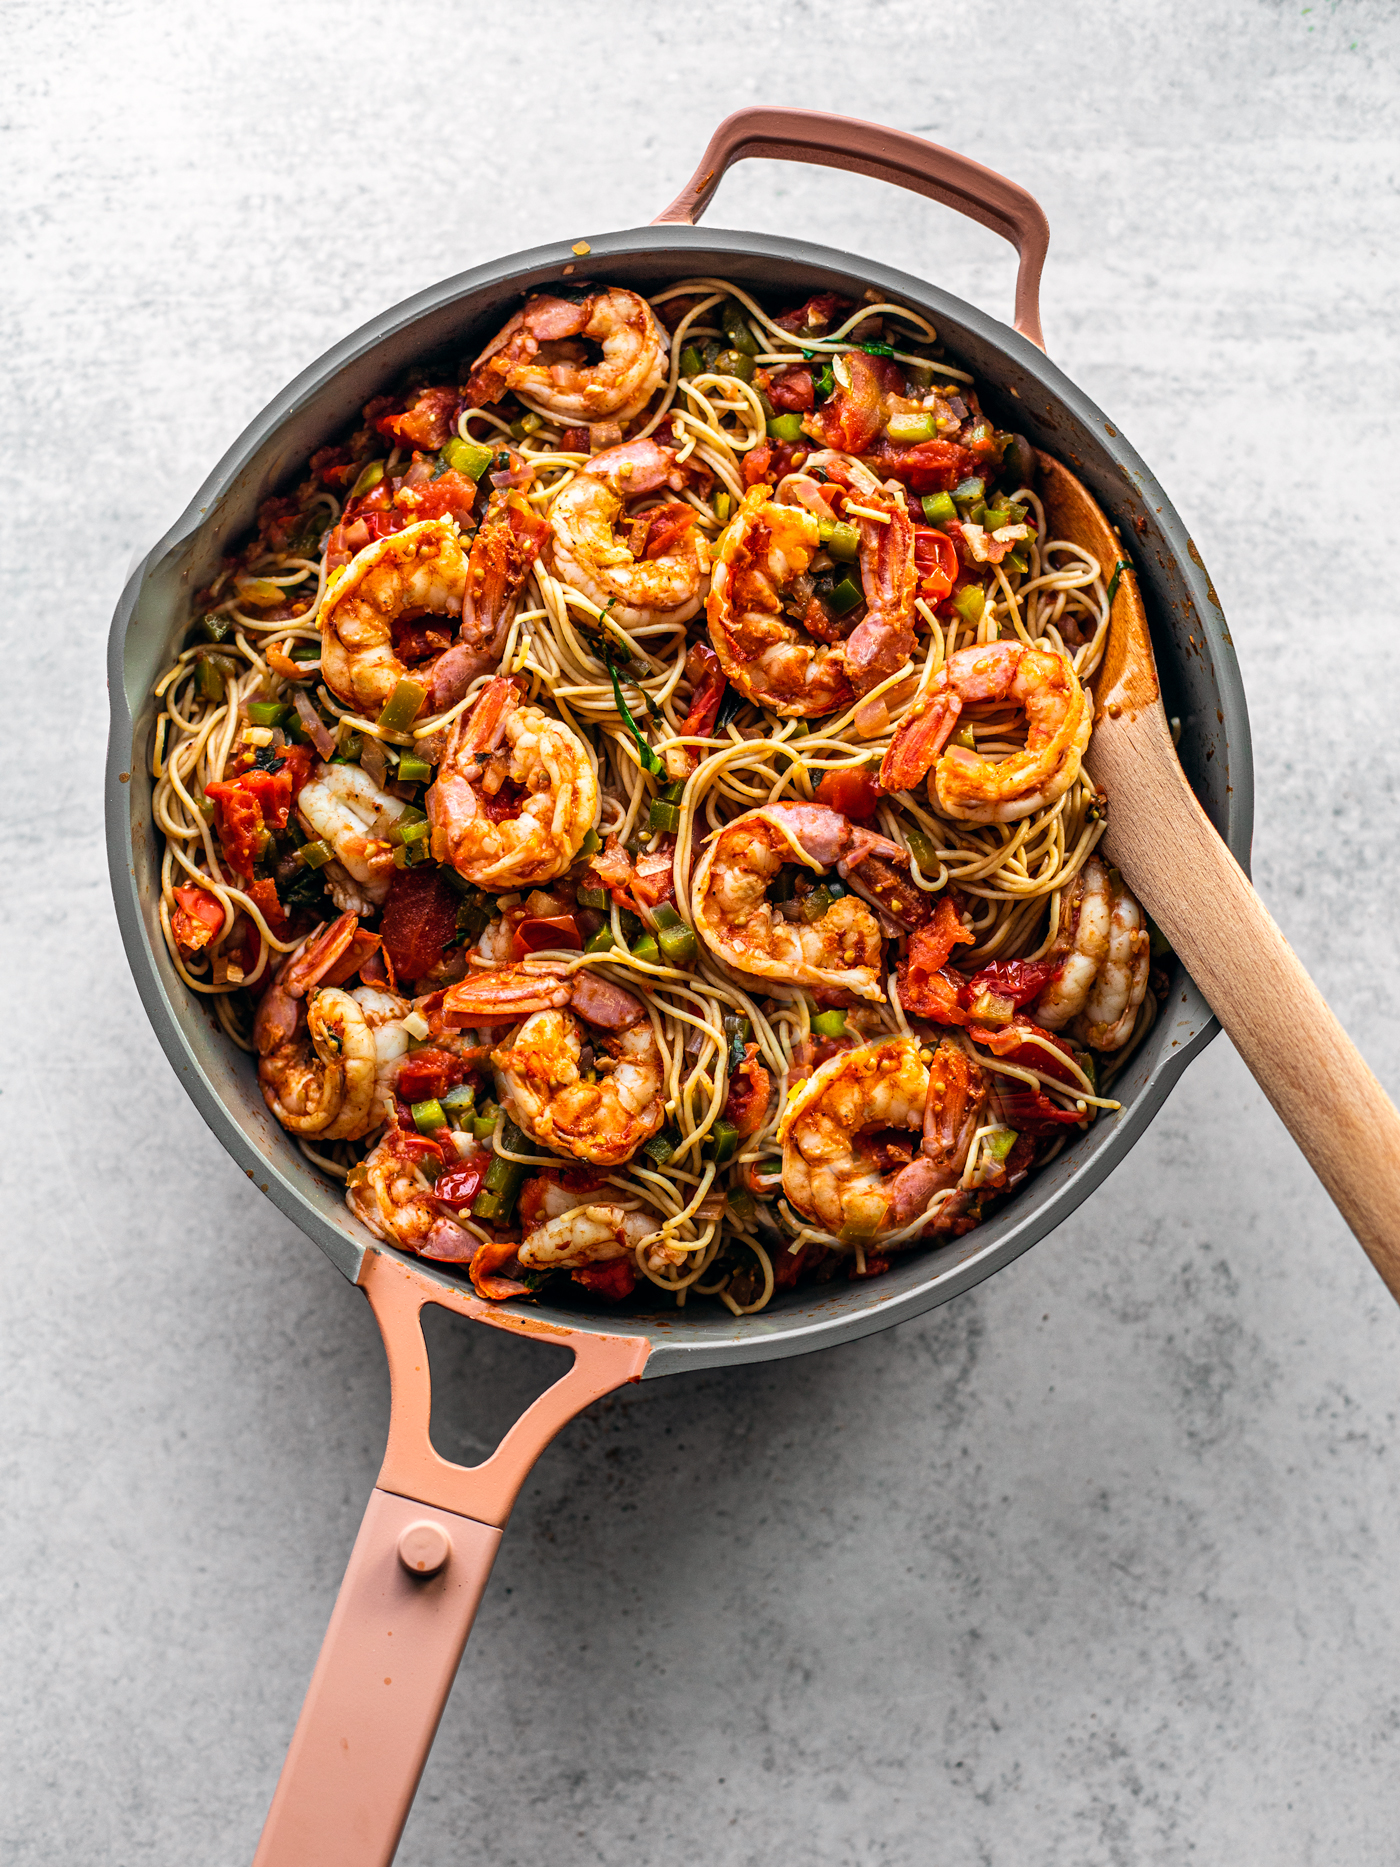 Pan brimming with pasta and Cajun shrimp with a wooden serving spoon.